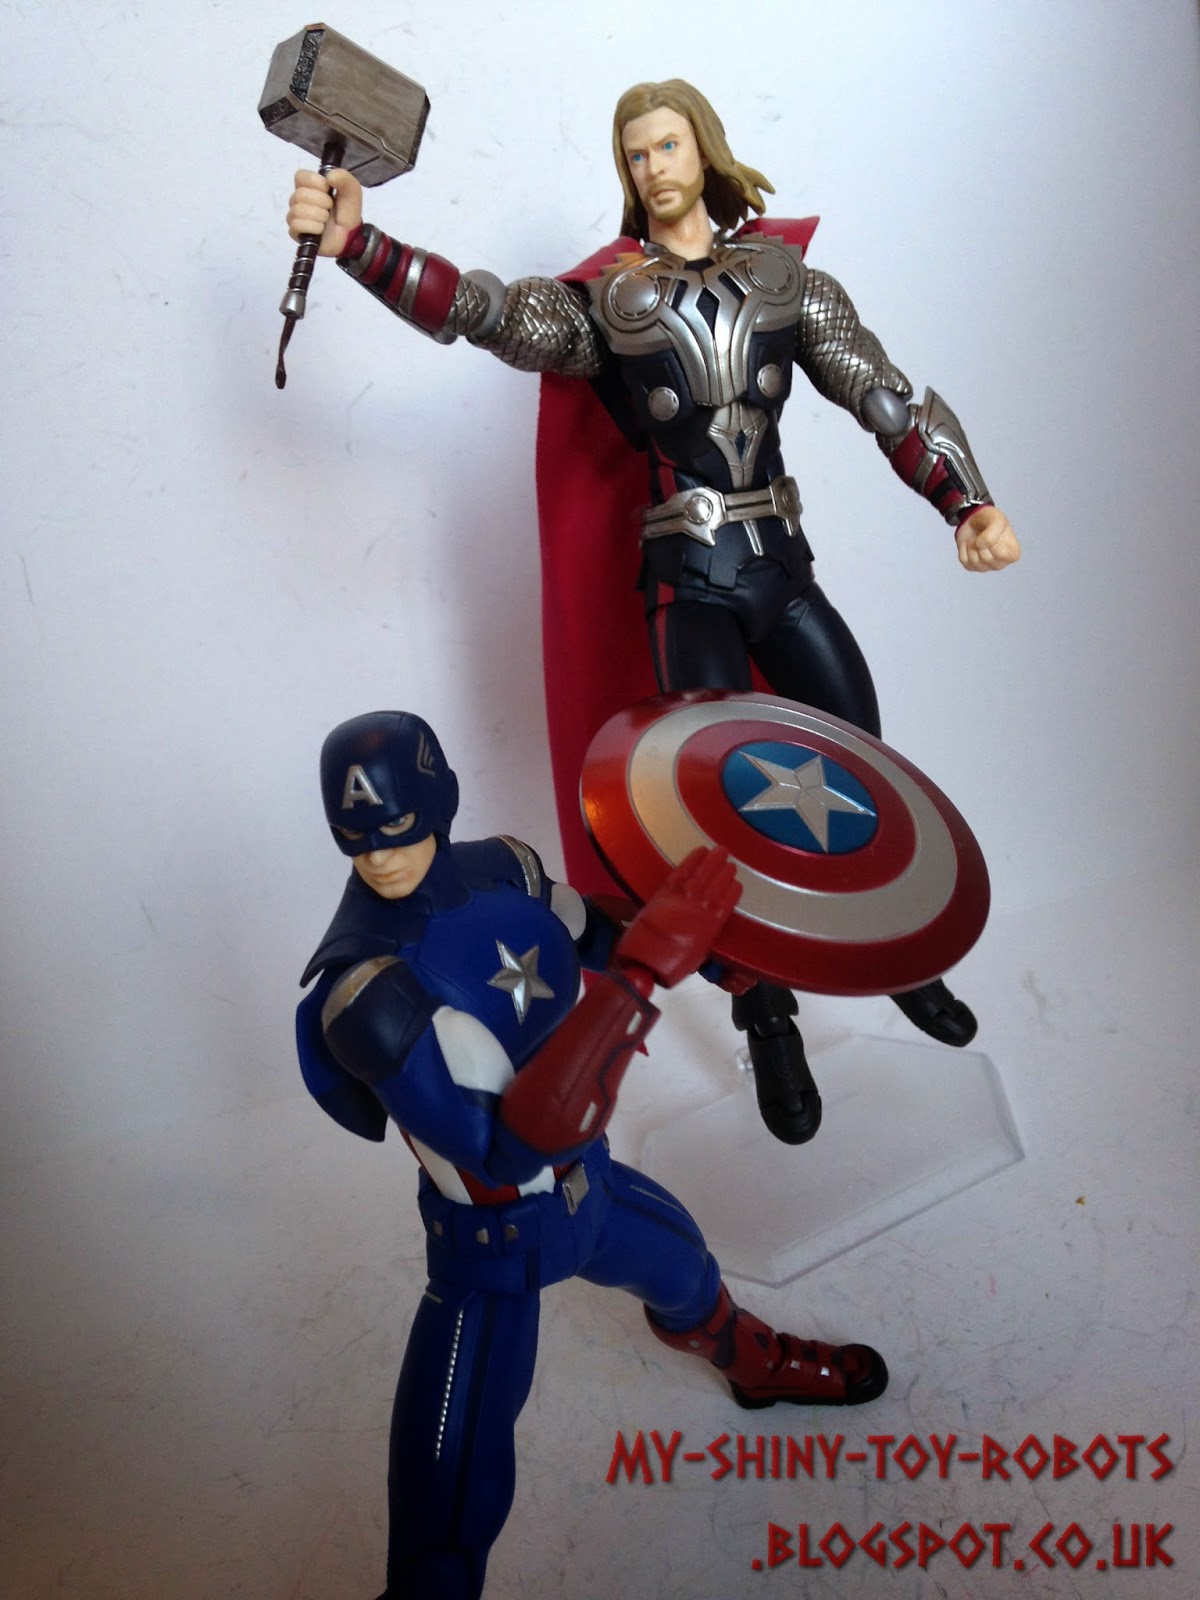 Cap and Thor team up